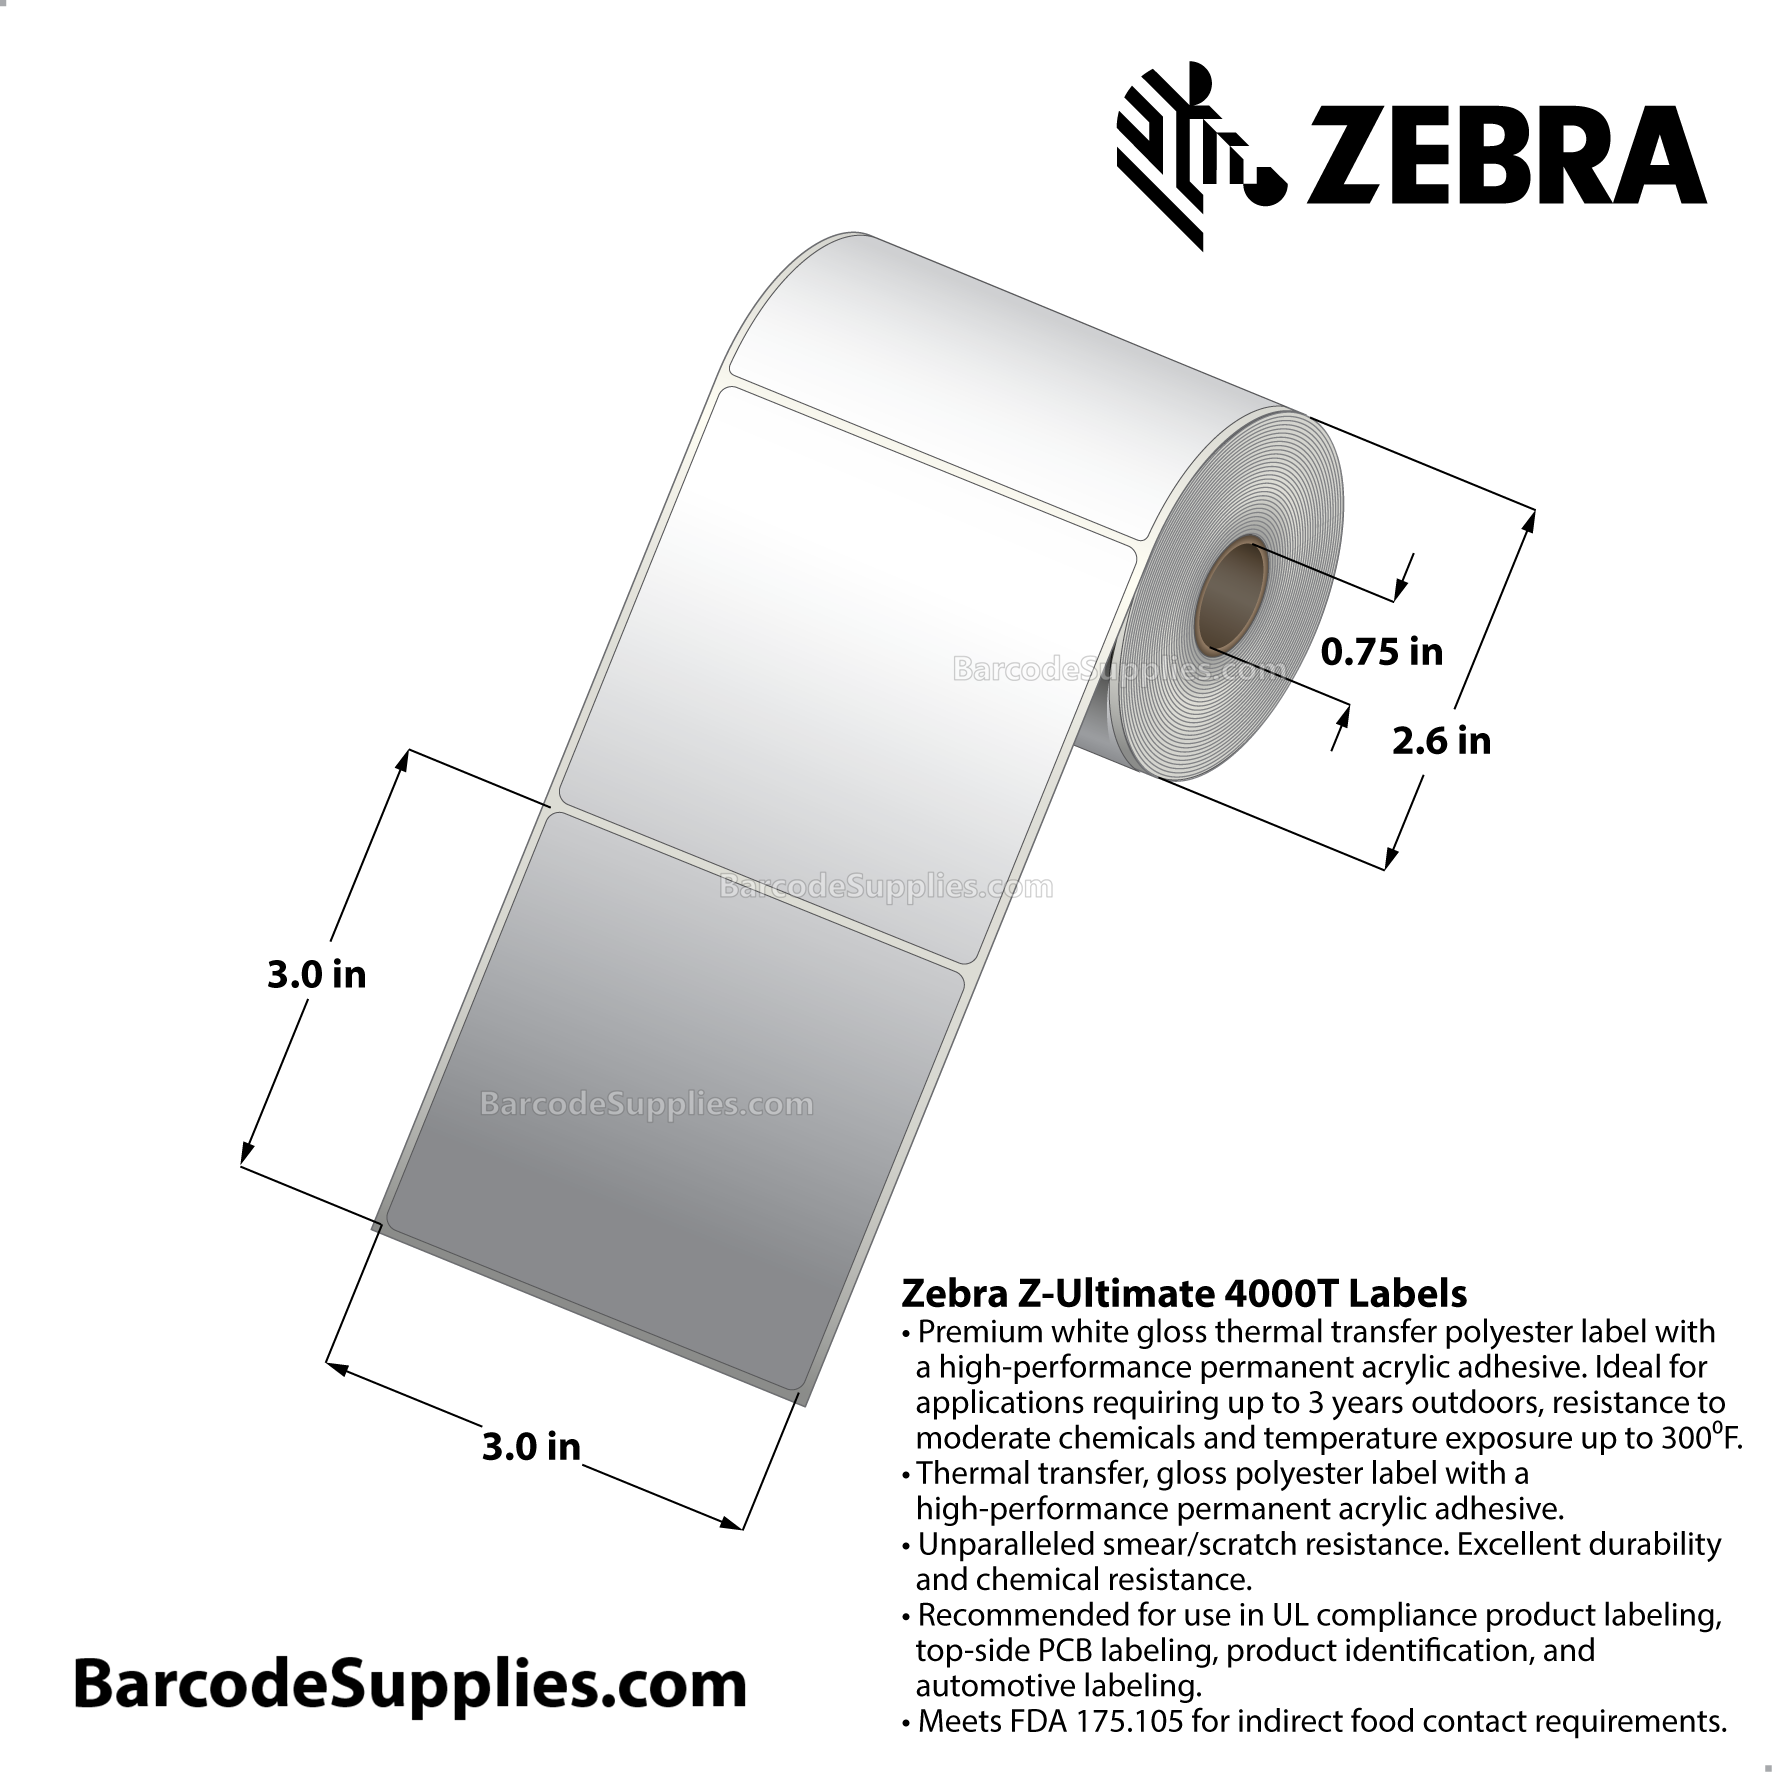 3 x 3 Thermal Transfer White Z-Ultimate 4000T Labels With Permanent Adhesive - Not Perforated - 230 Labels Per Roll - Carton Of 12 Rolls - 2760 Labels Total - MPN: 10008551